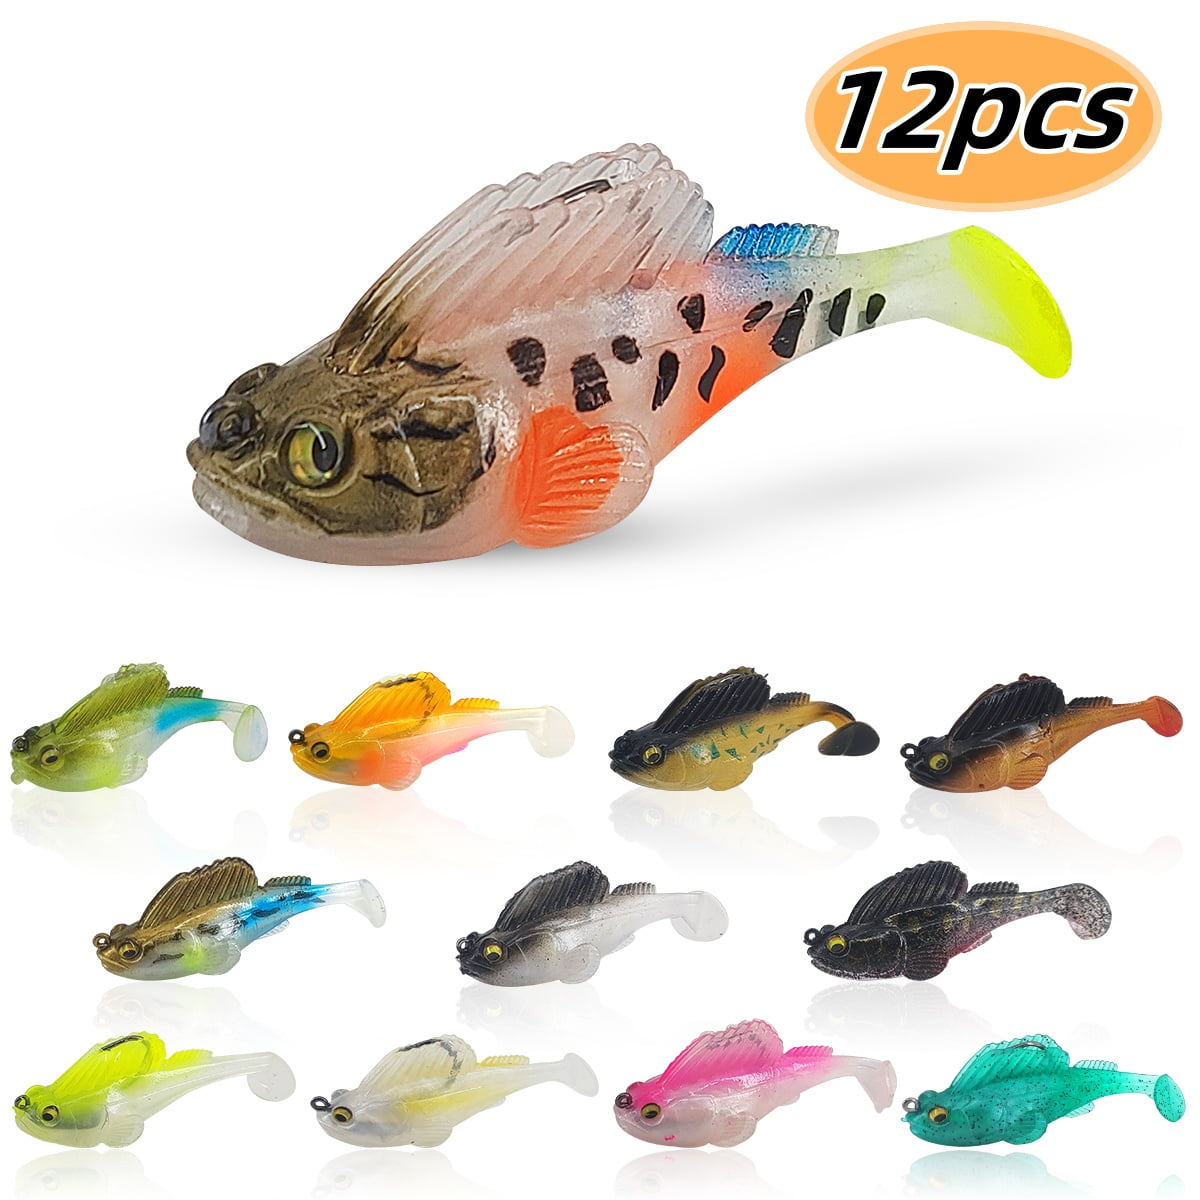 8pcs Artificial Fishing Lures - Top Water Popper Lures with 3D Eyes and  Hooks, Ideal for Saltwater and Freshwater Fishing Excursions 